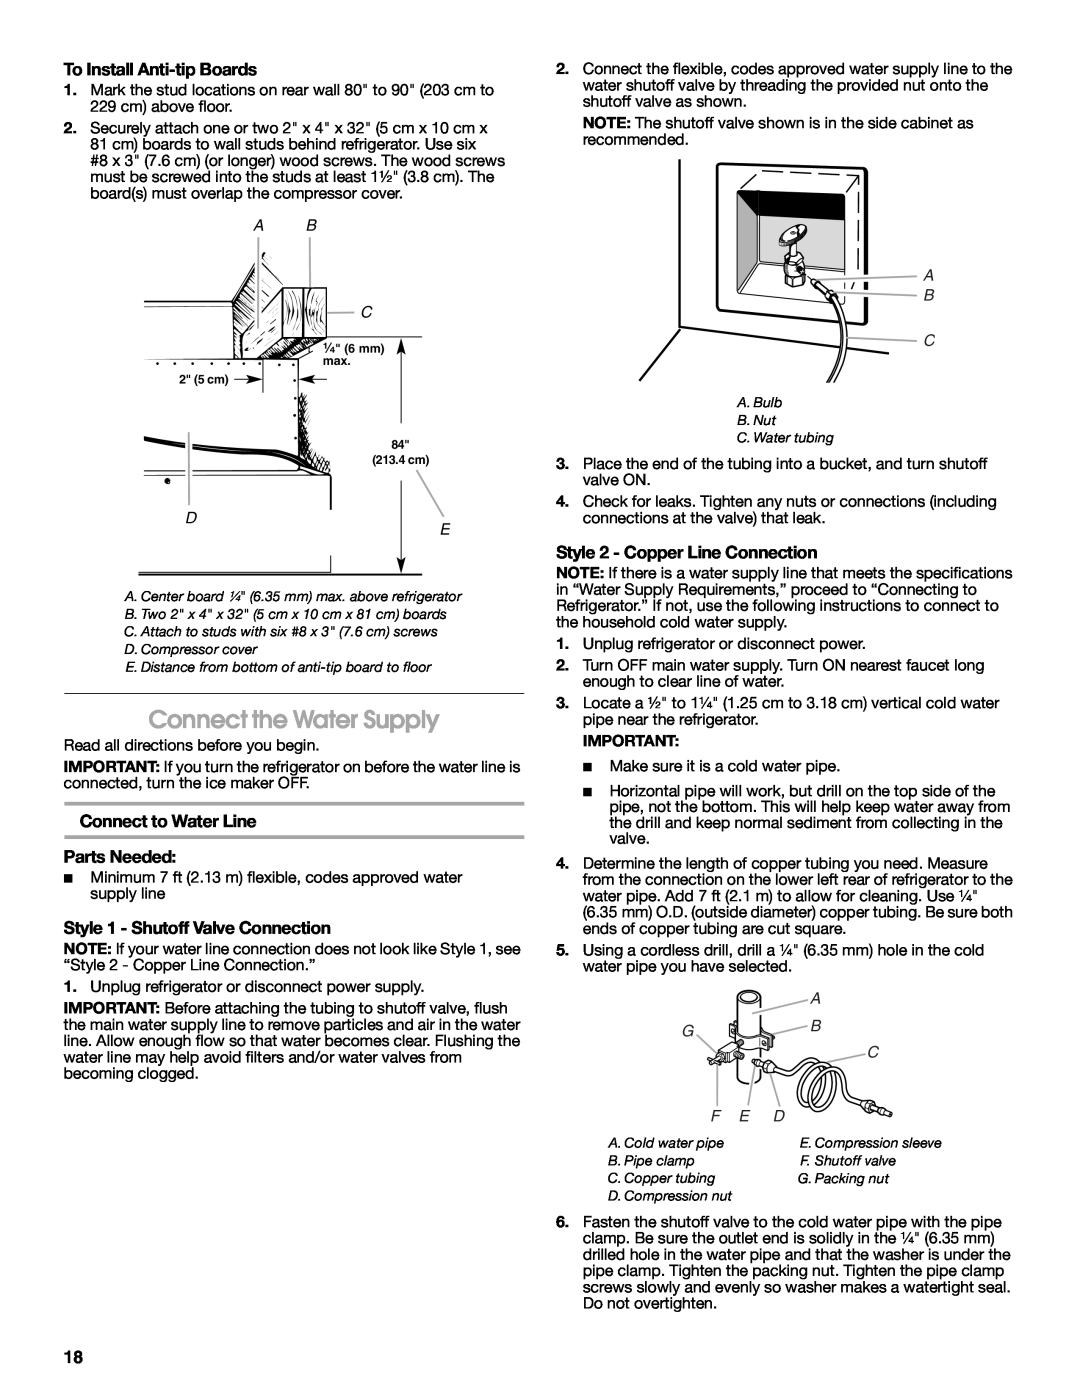 Jenn-Air W10379137A manual Connect the Water Supply, To Install Anti-tipBoards, Connect to Water Line Parts Needed, A B C 